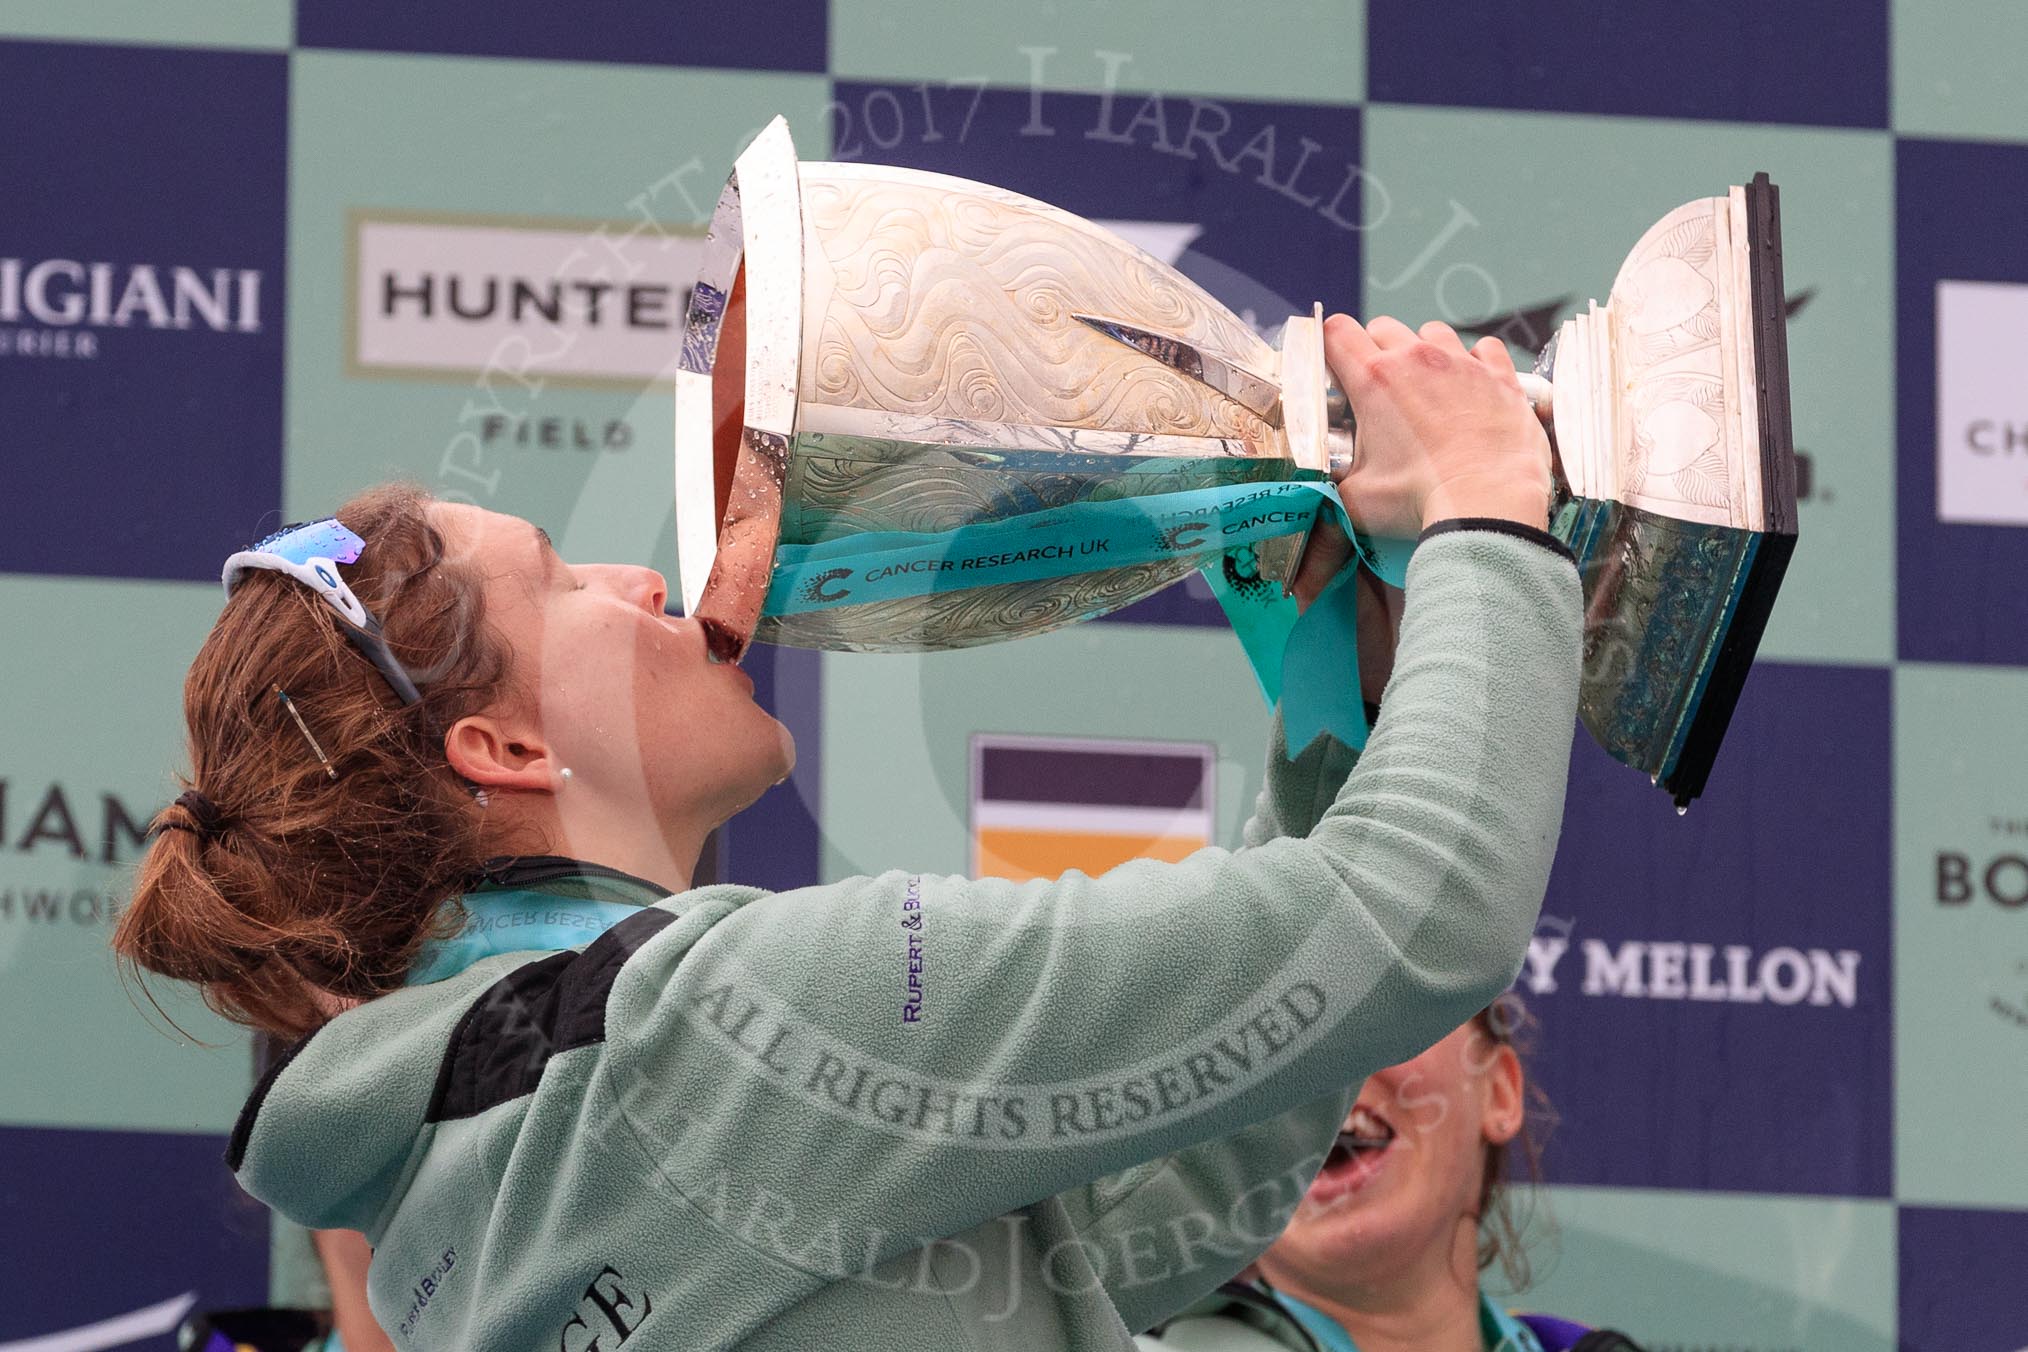 The Cancer Research UK Women's Boat Race 2018: Cambridge 7 seat Myriam Goudet-Boukhatmi drinking champagne out of the Women's Boat Race trophy.
River Thames between Putney Bridge and Mortlake,
London SW15,

United Kingdom,
on 24 March 2018 at 17:09, image #291